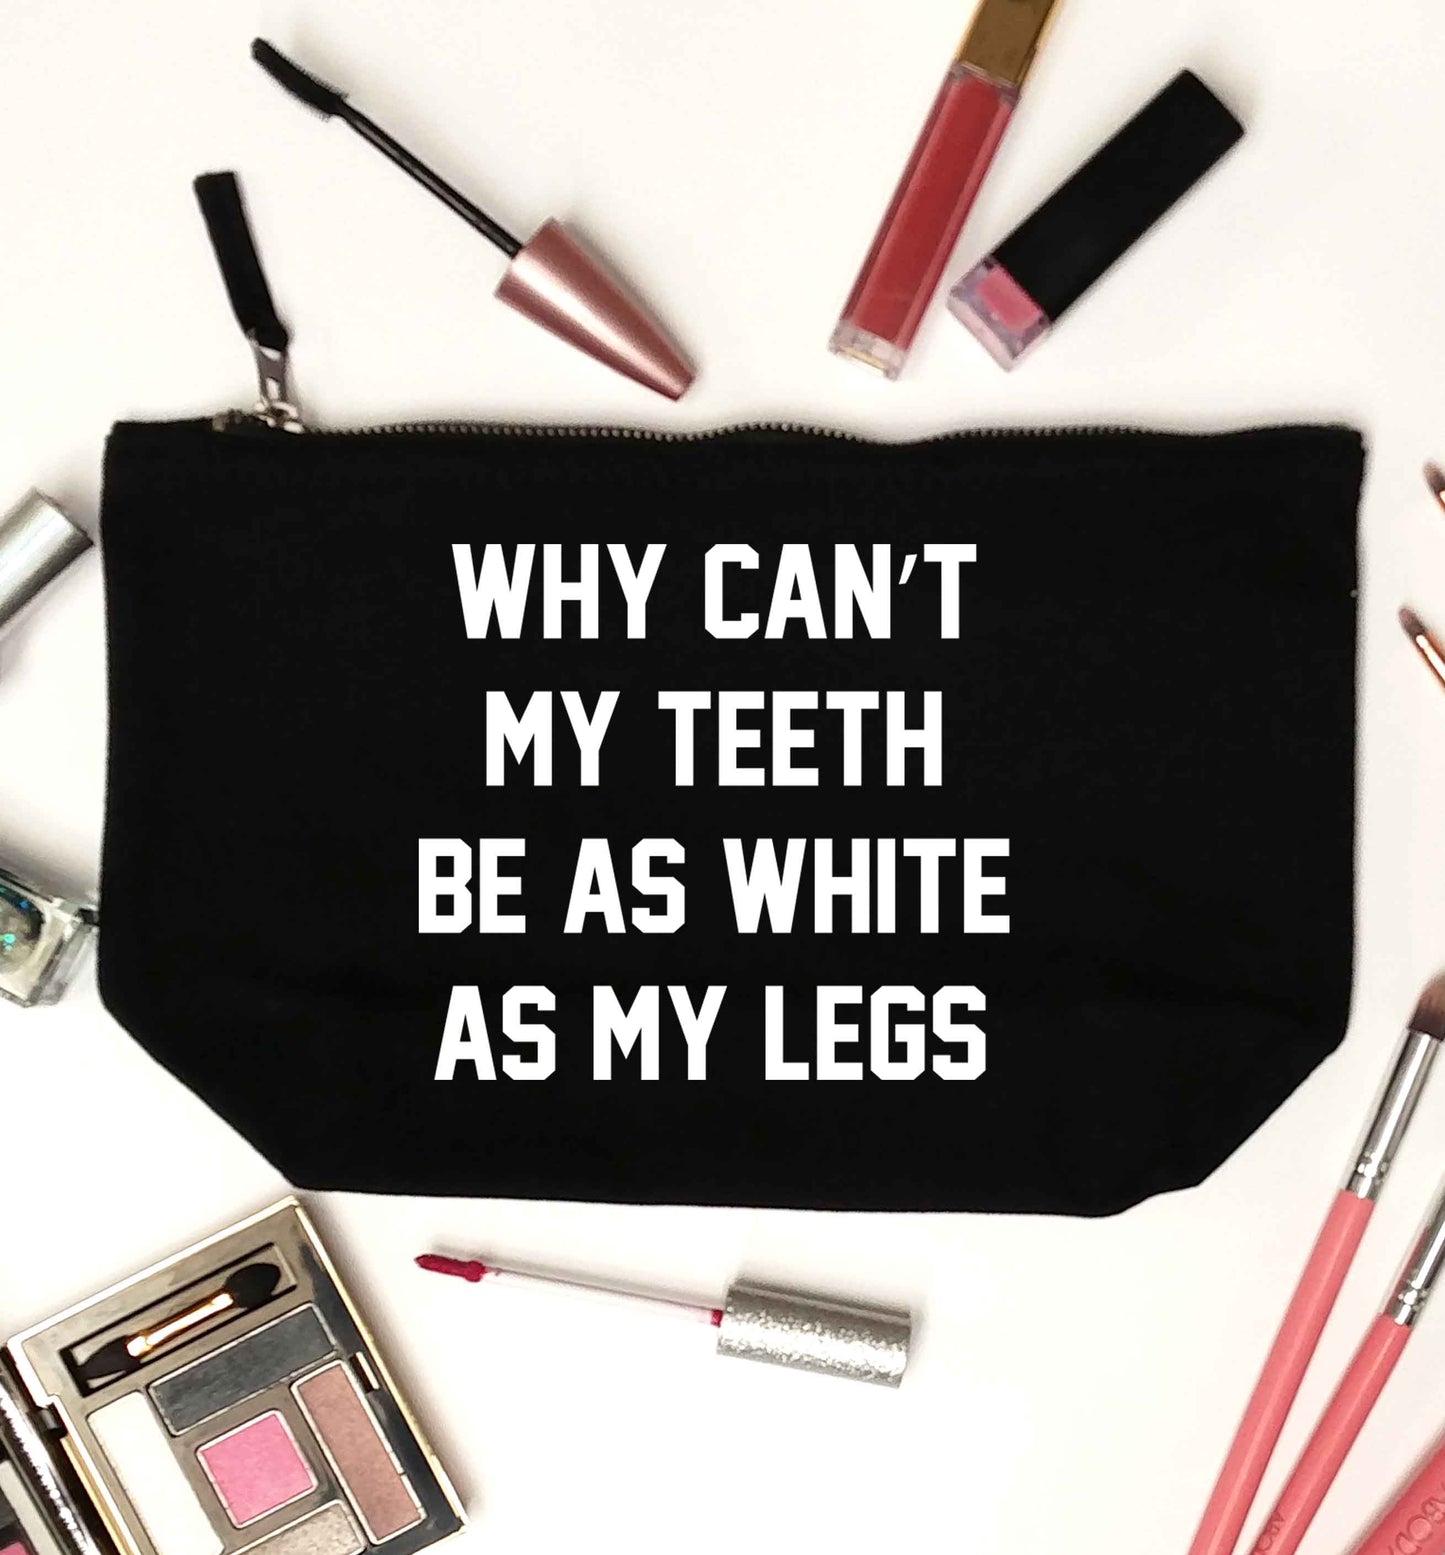 Why can't my teeth be as white as my legs black makeup bag